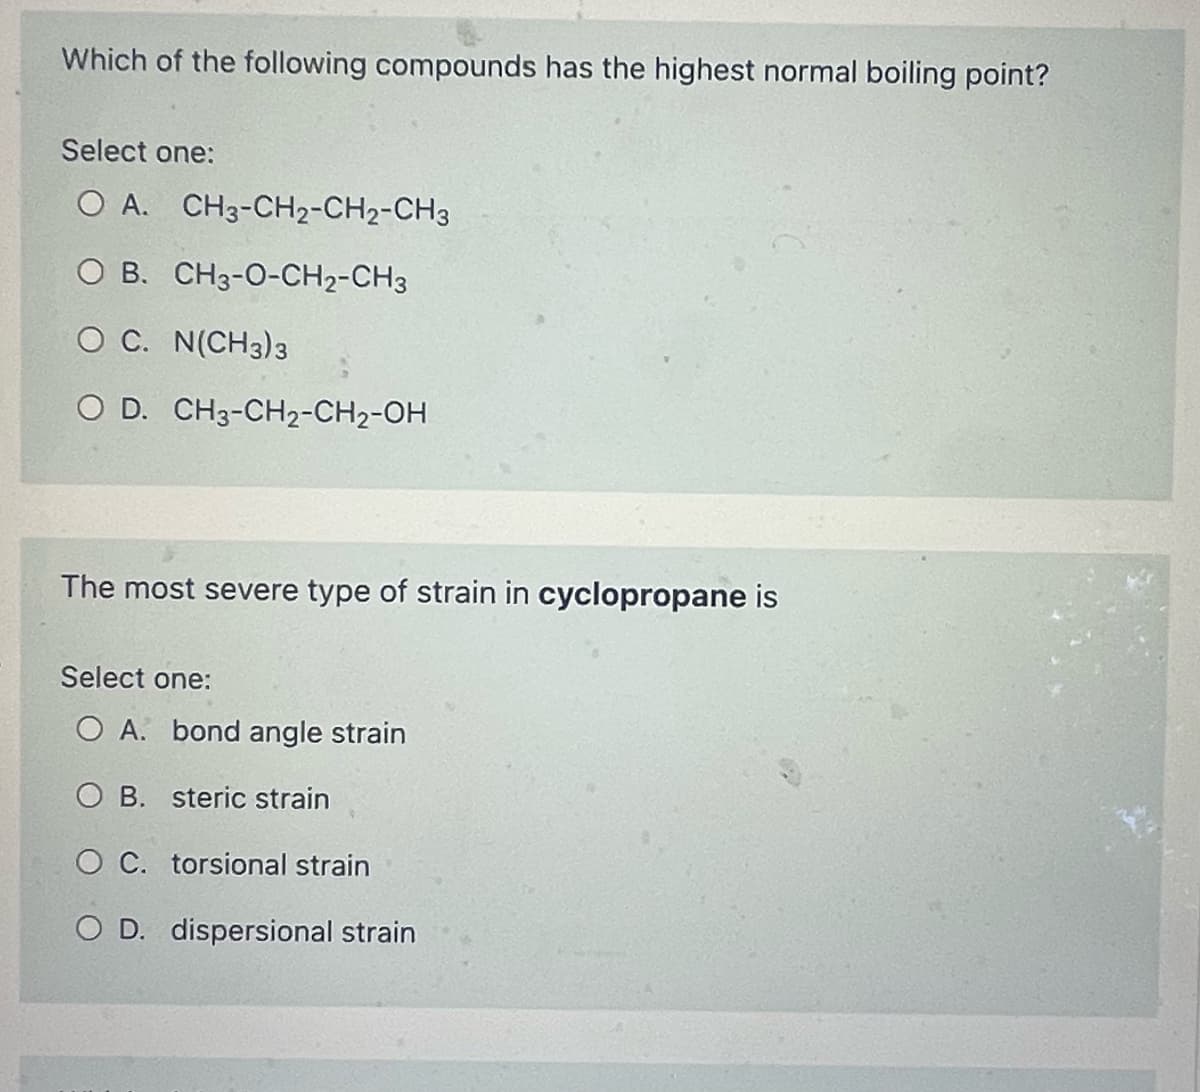 Which of the following compounds has the highest normal boiling point?
Select one:
O A. CH3-CH2-CH2-CH3
O B. CH3-O-CH2-CH3
O C. N(CH3)3
O D. CH3-CH₂-CH₂-OH
The most severe type of strain in cyclopropane is
Select one:
O A. bond angle strain
B.
steric strain
O C. torsional strain
O D. dispersional strain